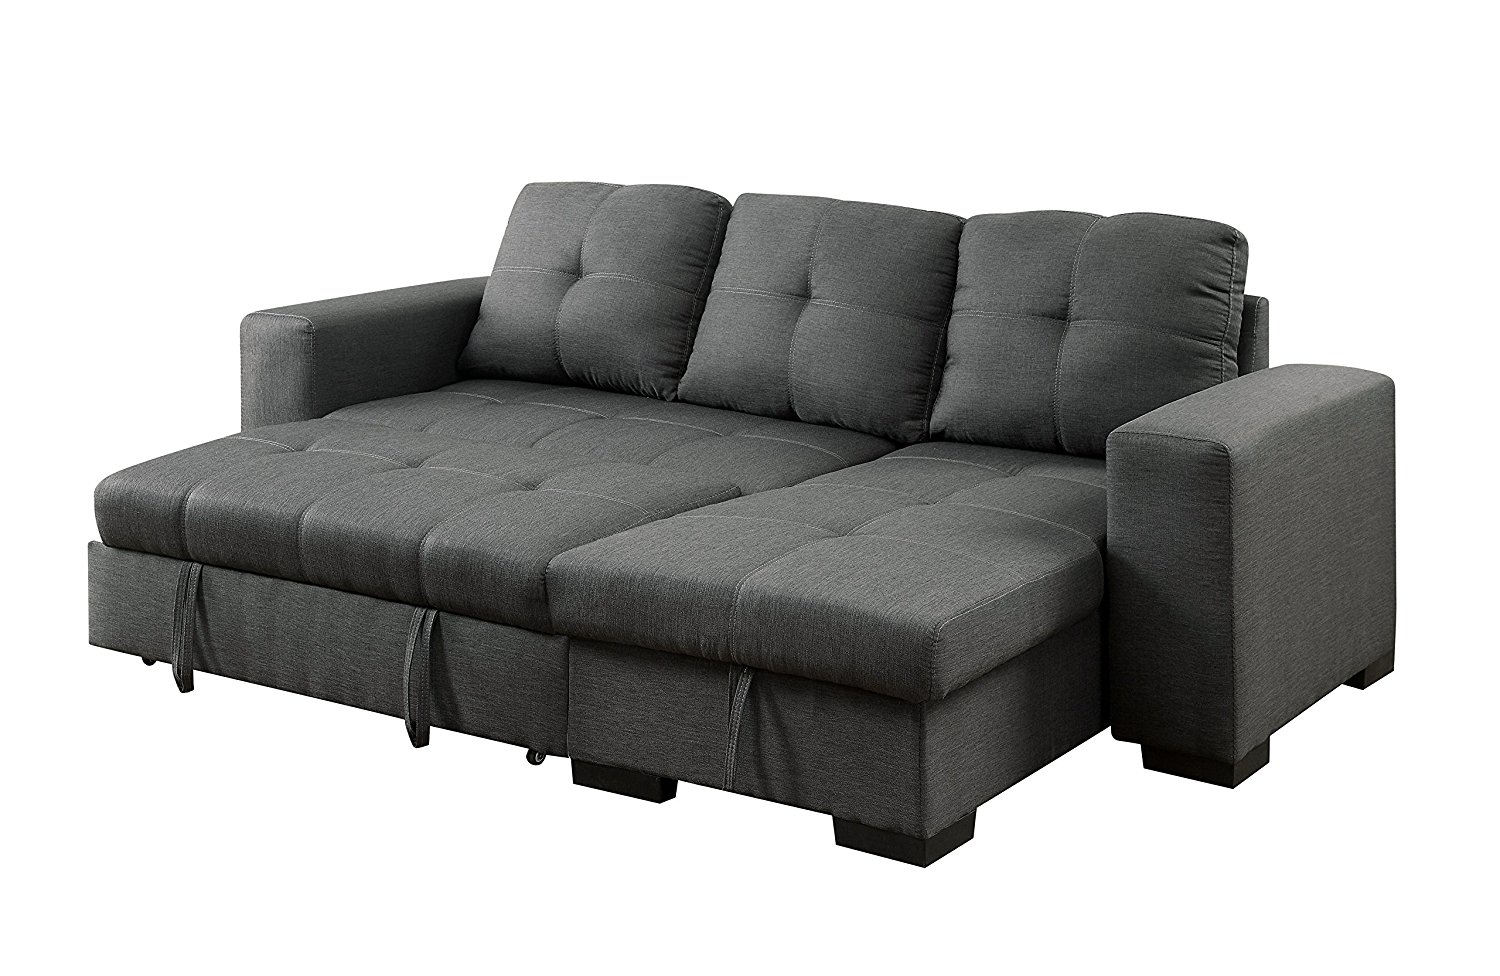 Living Room Couch With Pull Out Bed